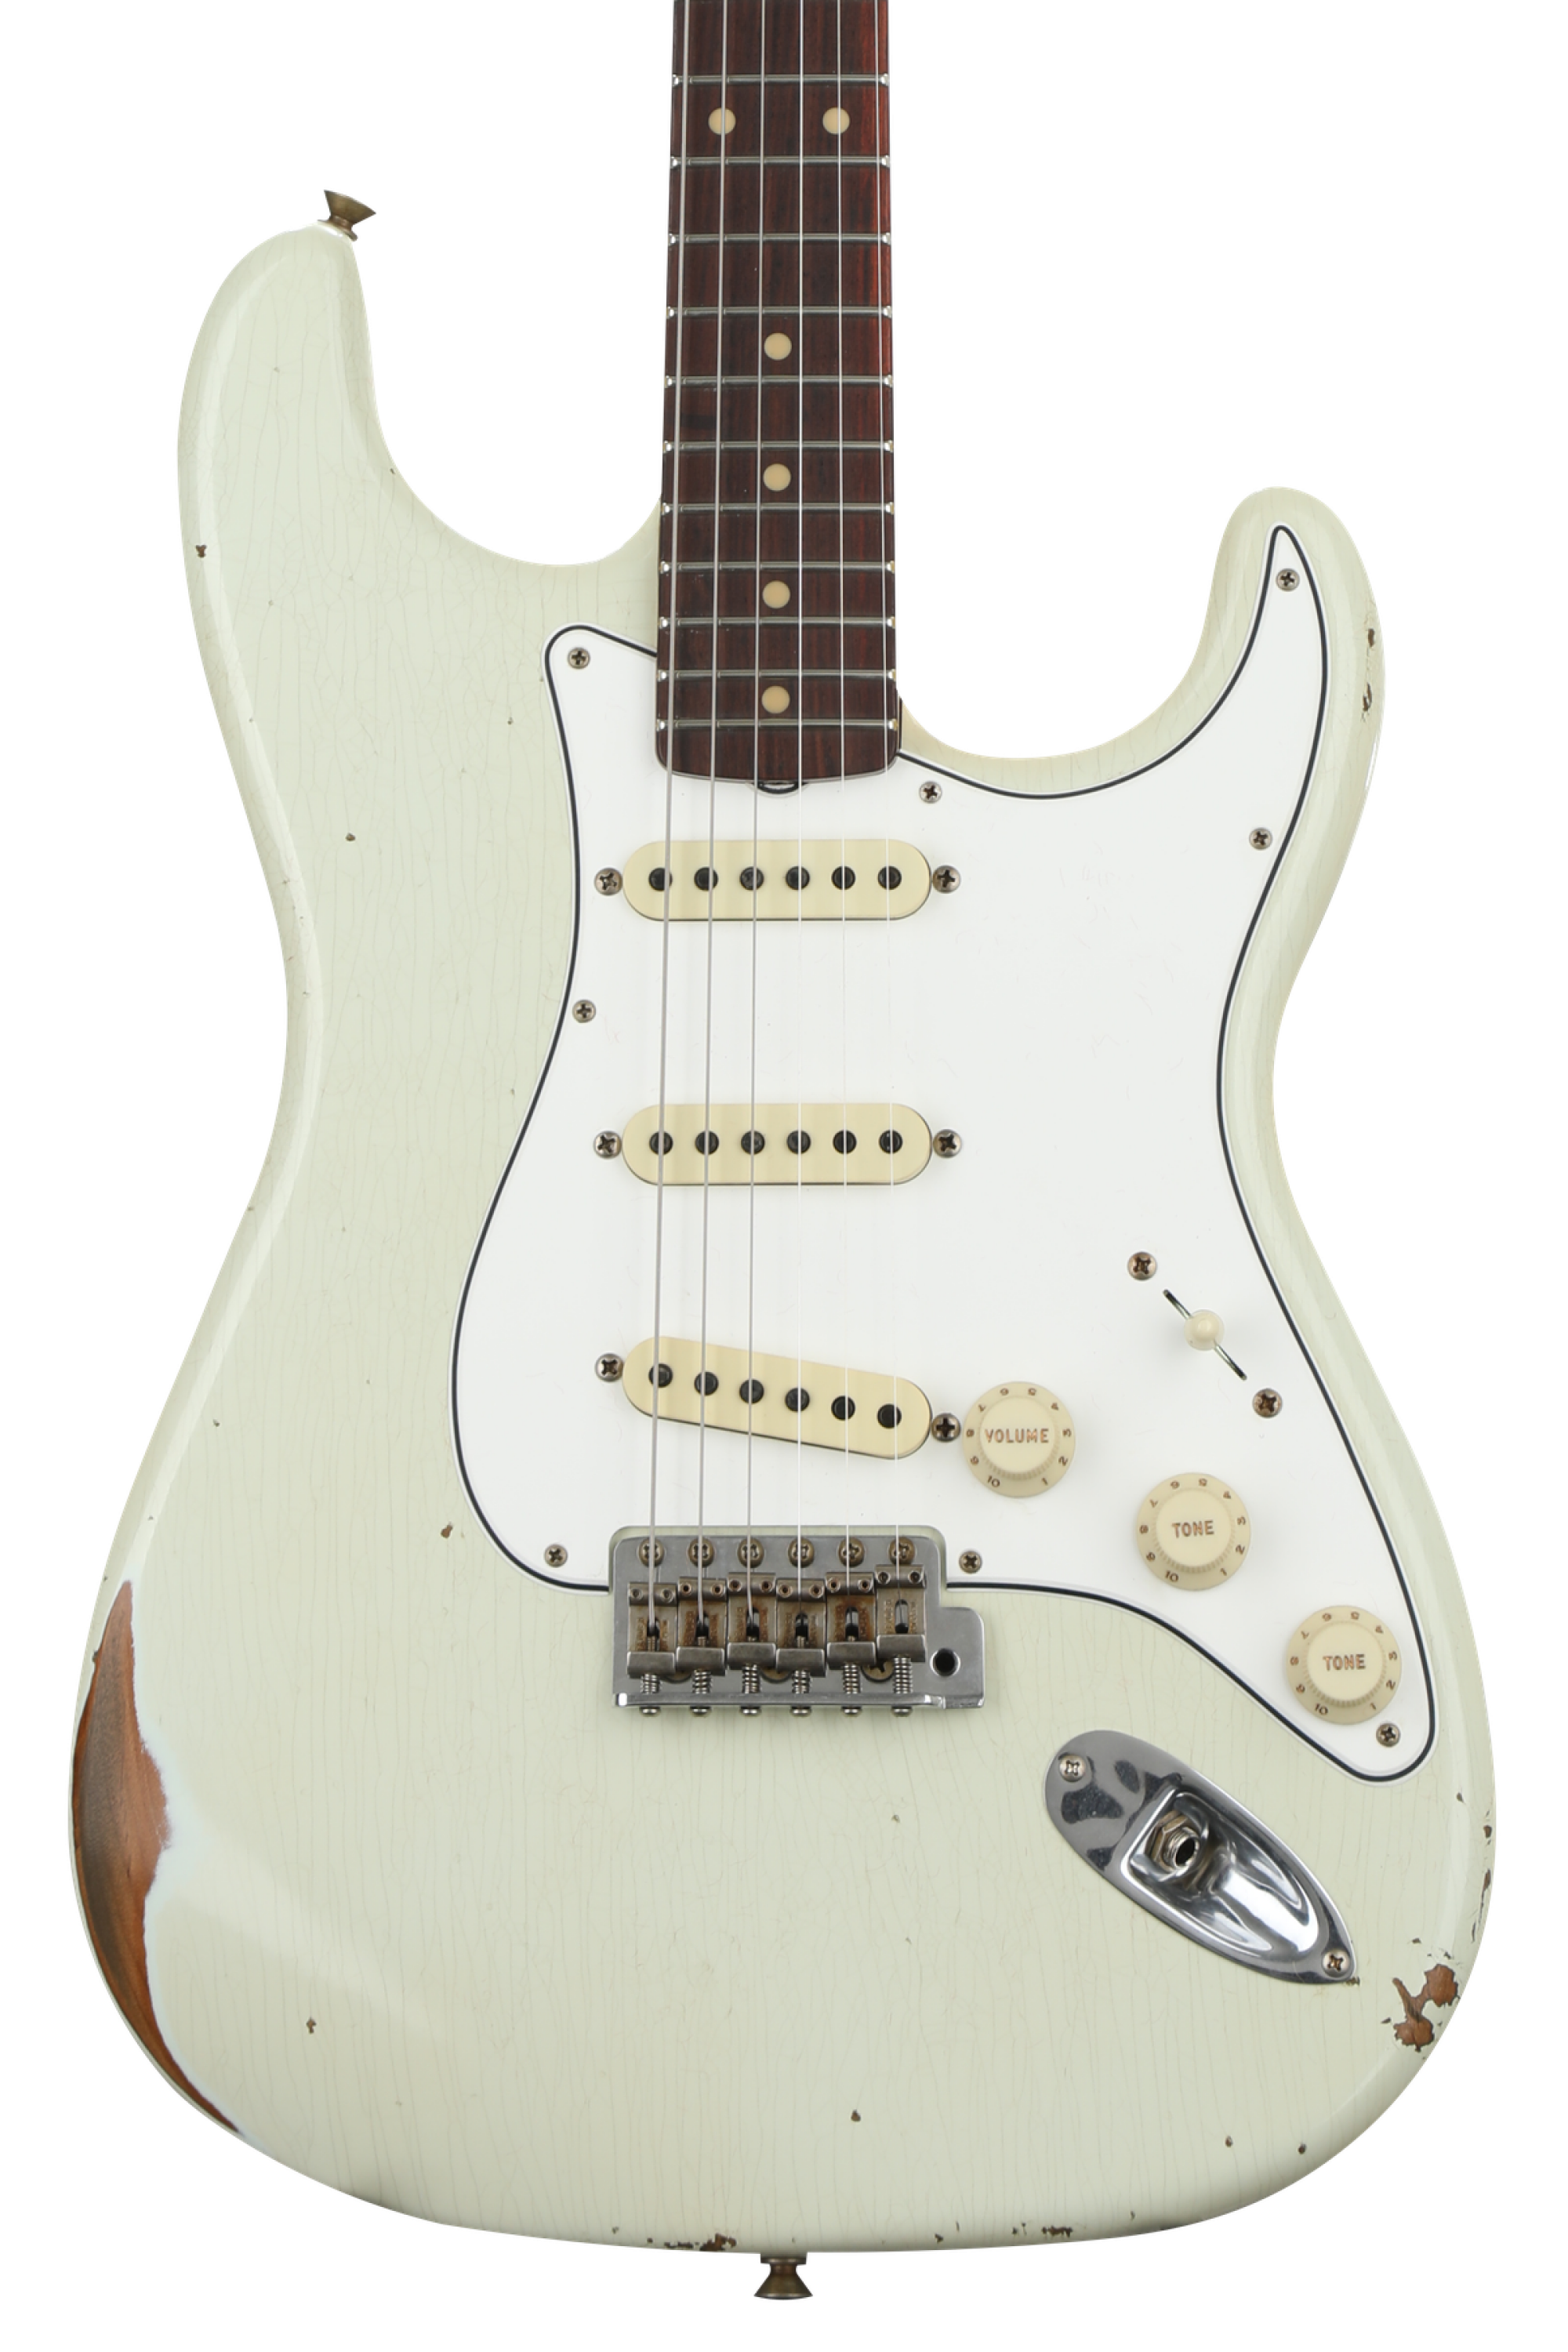 Fender Custom Shop Limited Edition Roasted Journeyman Relic Tomatillo  Stratocaster - Aged Tomatillo Green | Sweetwater